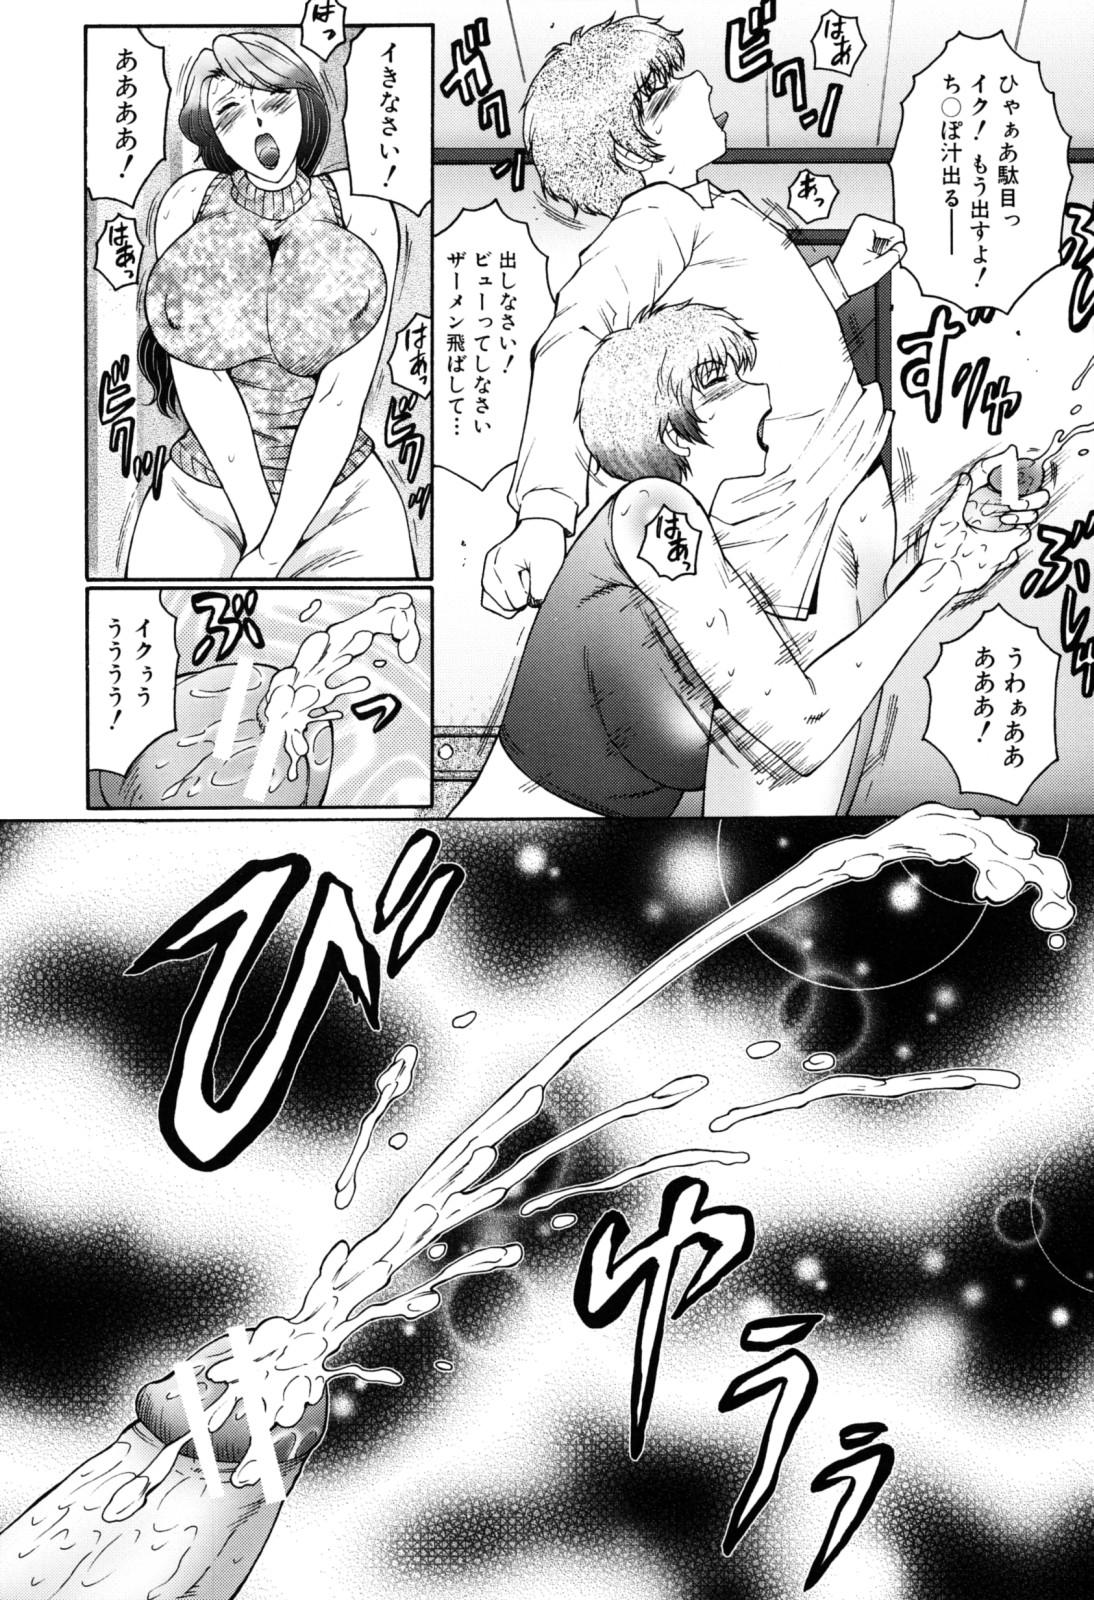 Boshino Toriko - The Captive of Mother and the Son 13